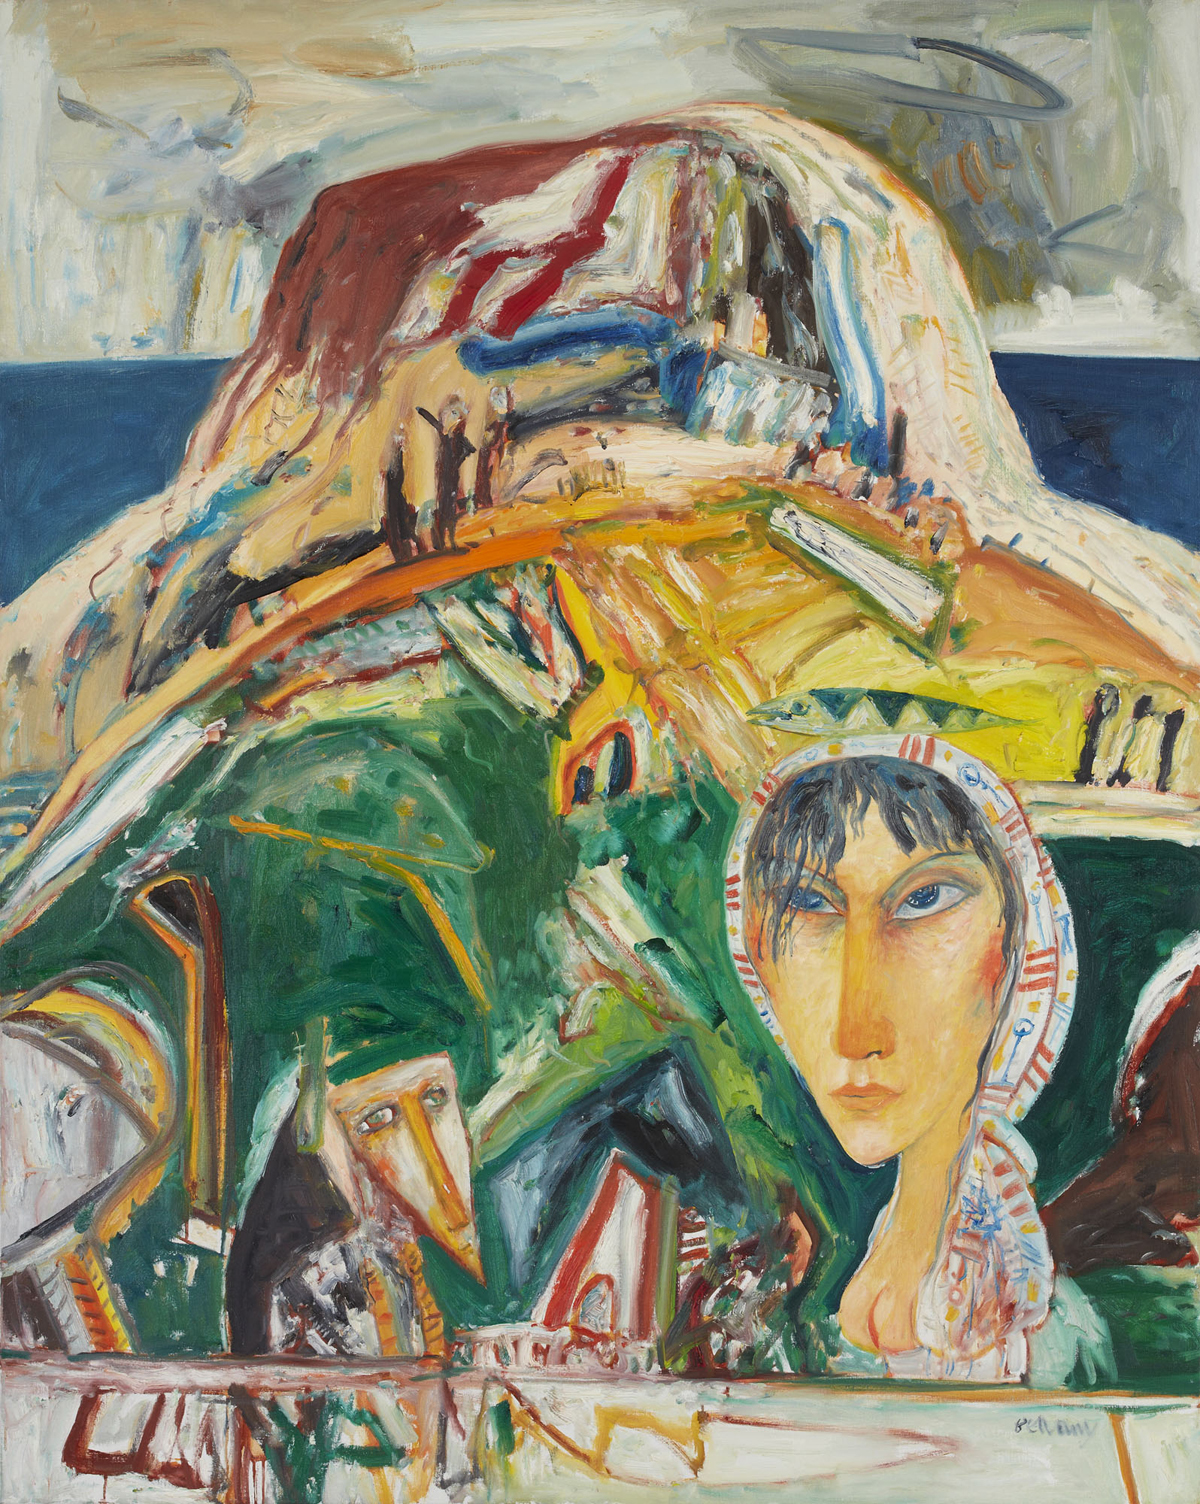 Loth (1999), Oil on Canvas, 60 x 48 inches